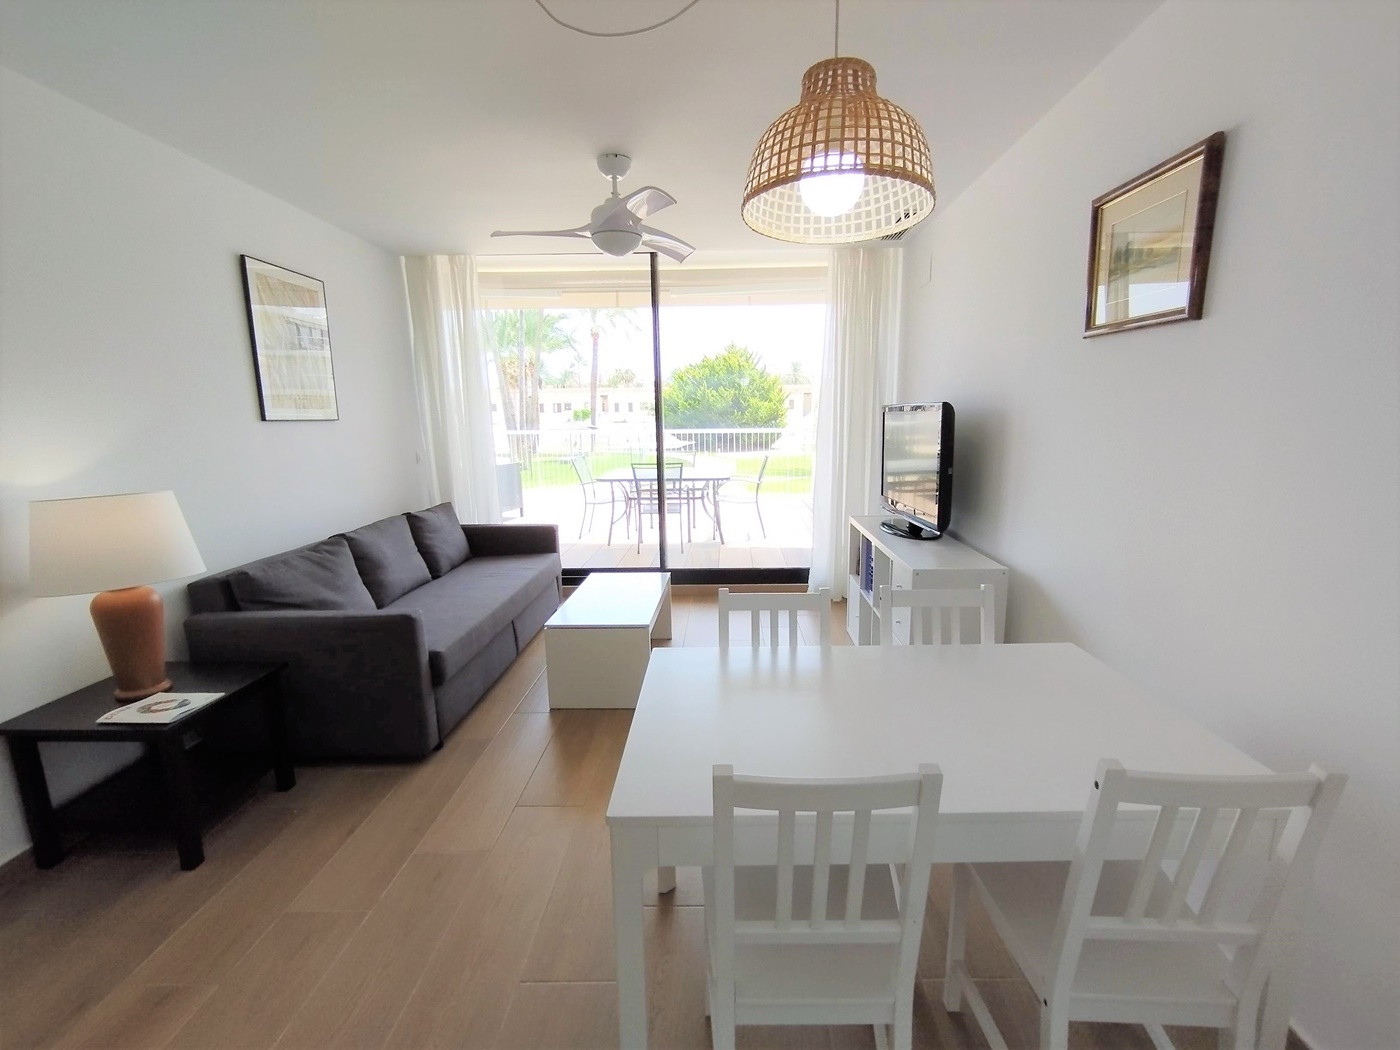 Ground floor apartment for sale in Denia on the first line